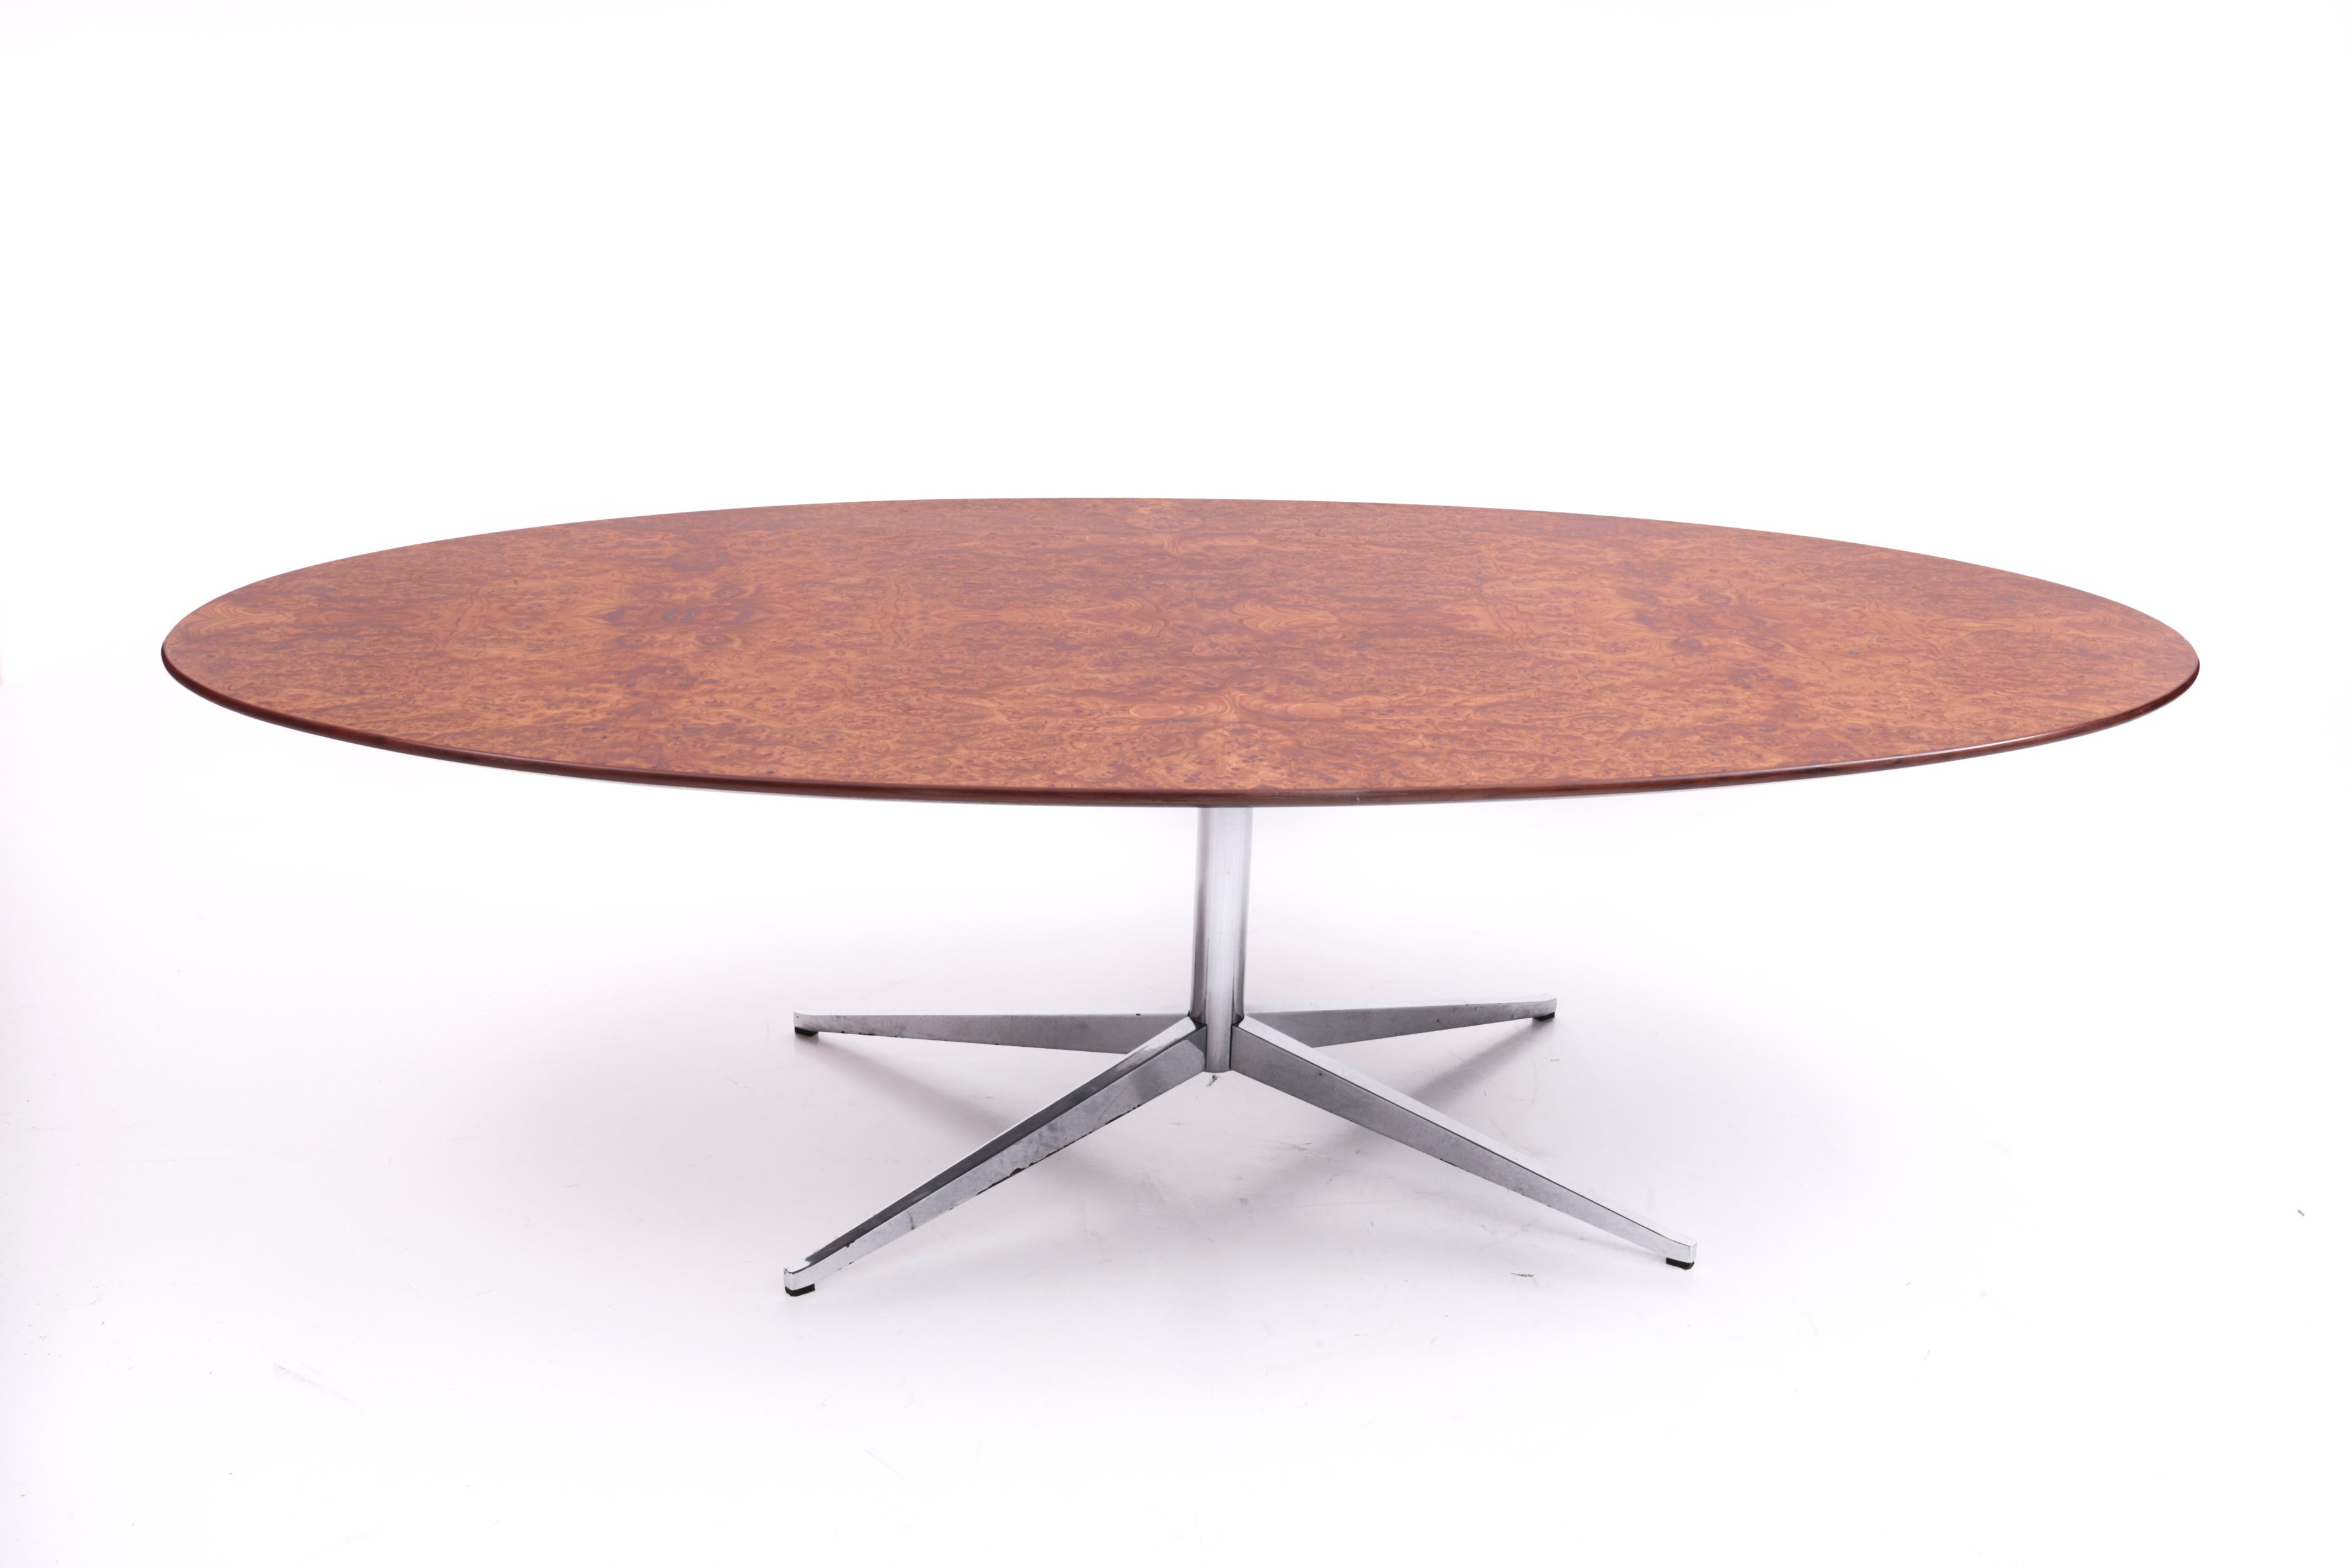 Vintage Oval Table With Wooden Top By Knoll For Sale